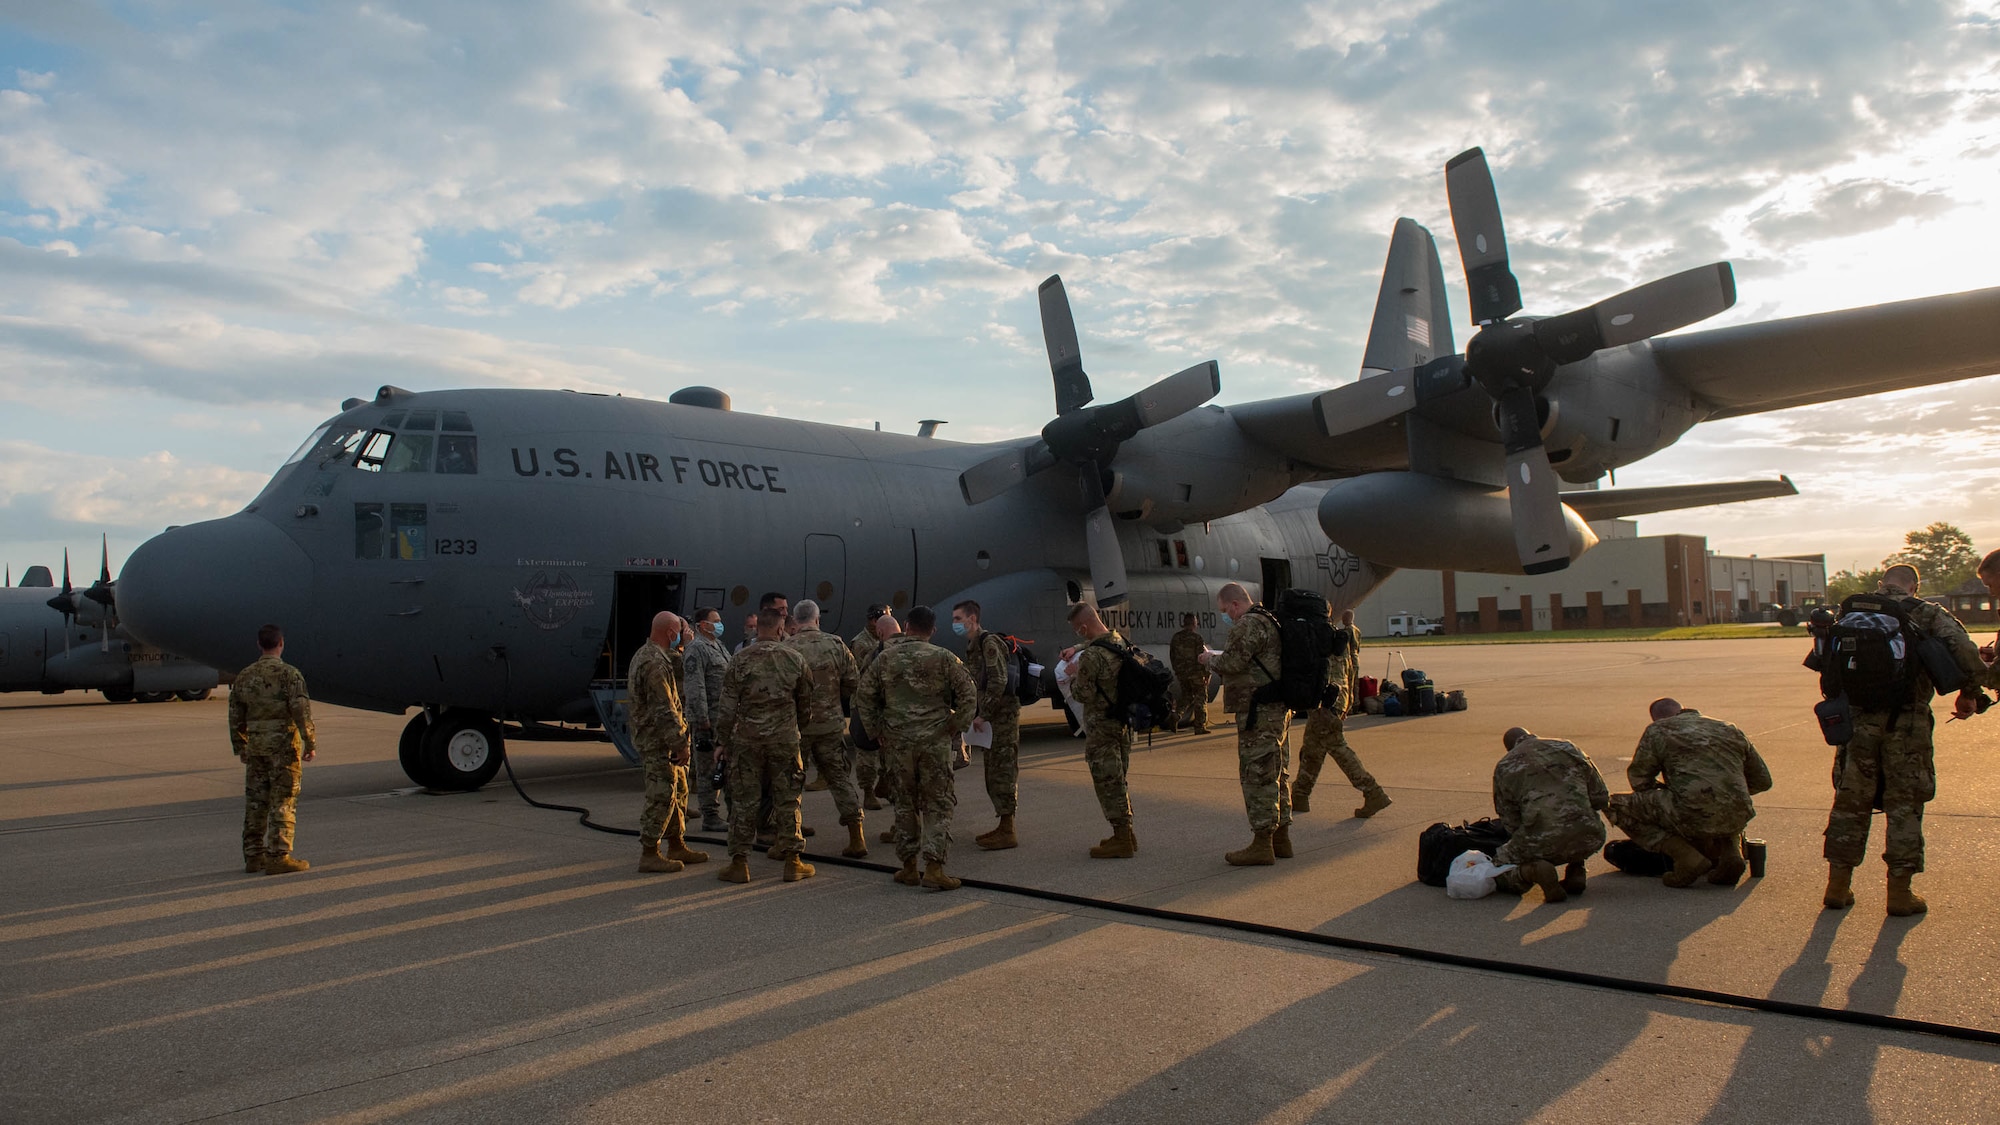 Members of the 123rd Airlift Wing board a C-130 Hercules aircraft at the Kentucky Air National Guard Base in Louisville, Ky., June 24, 2020, prior to deploying to the Persian Gulf region. The Airmen will spend four months flying troops and cargo across the U.S. Central Command area of responsibility, which includes Iraq, Afghanistan and northern Africa. (U.S. Air National Guard photo by Senior Airman Clayton Wear)